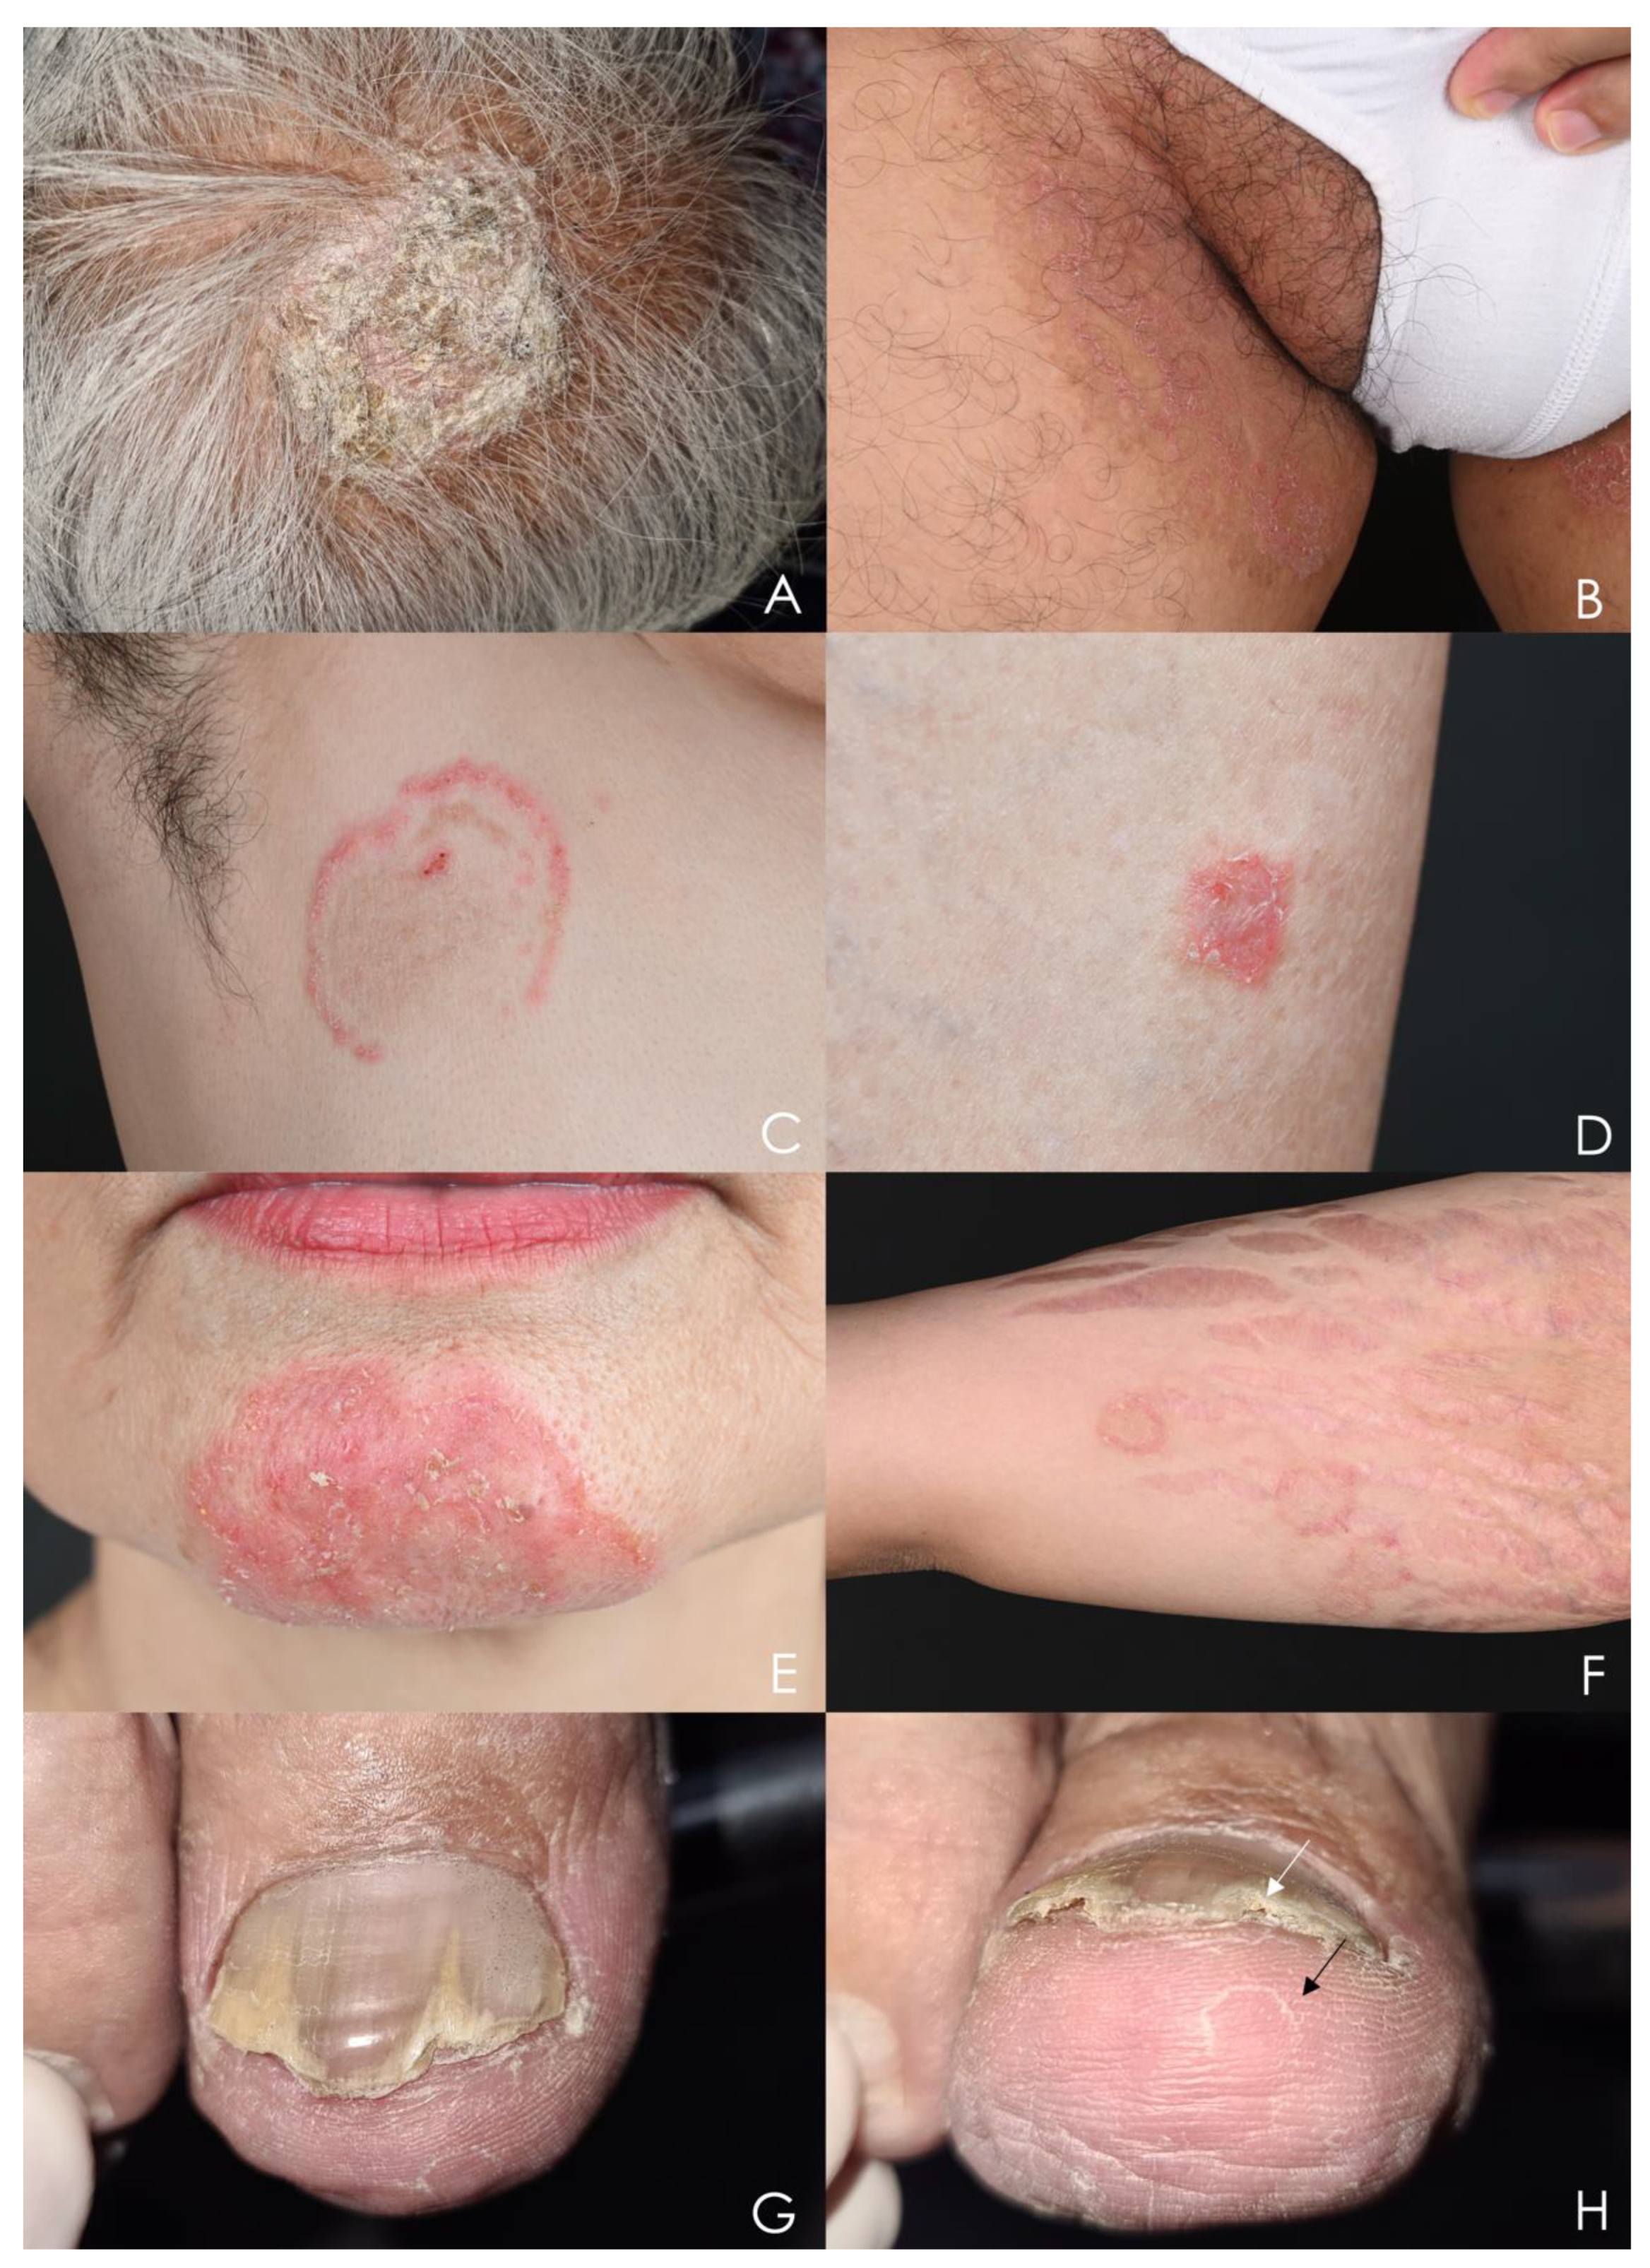 What Is Tinea Manuum And Who Is Most At Risk?